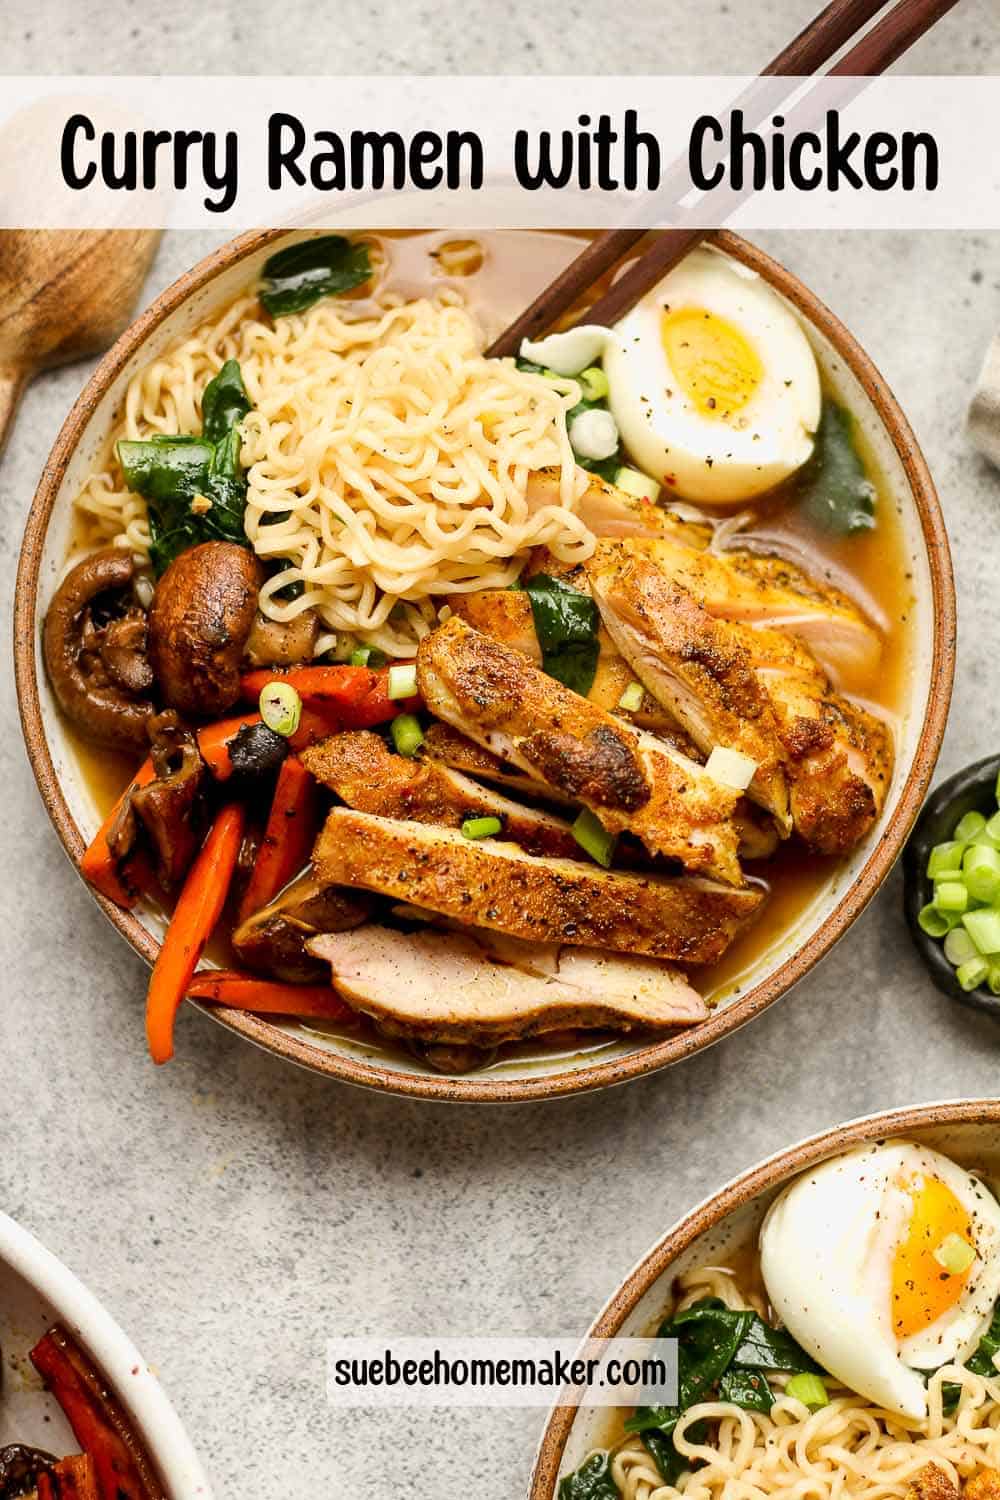 A bowl of curry ramen with chicken and veggies.